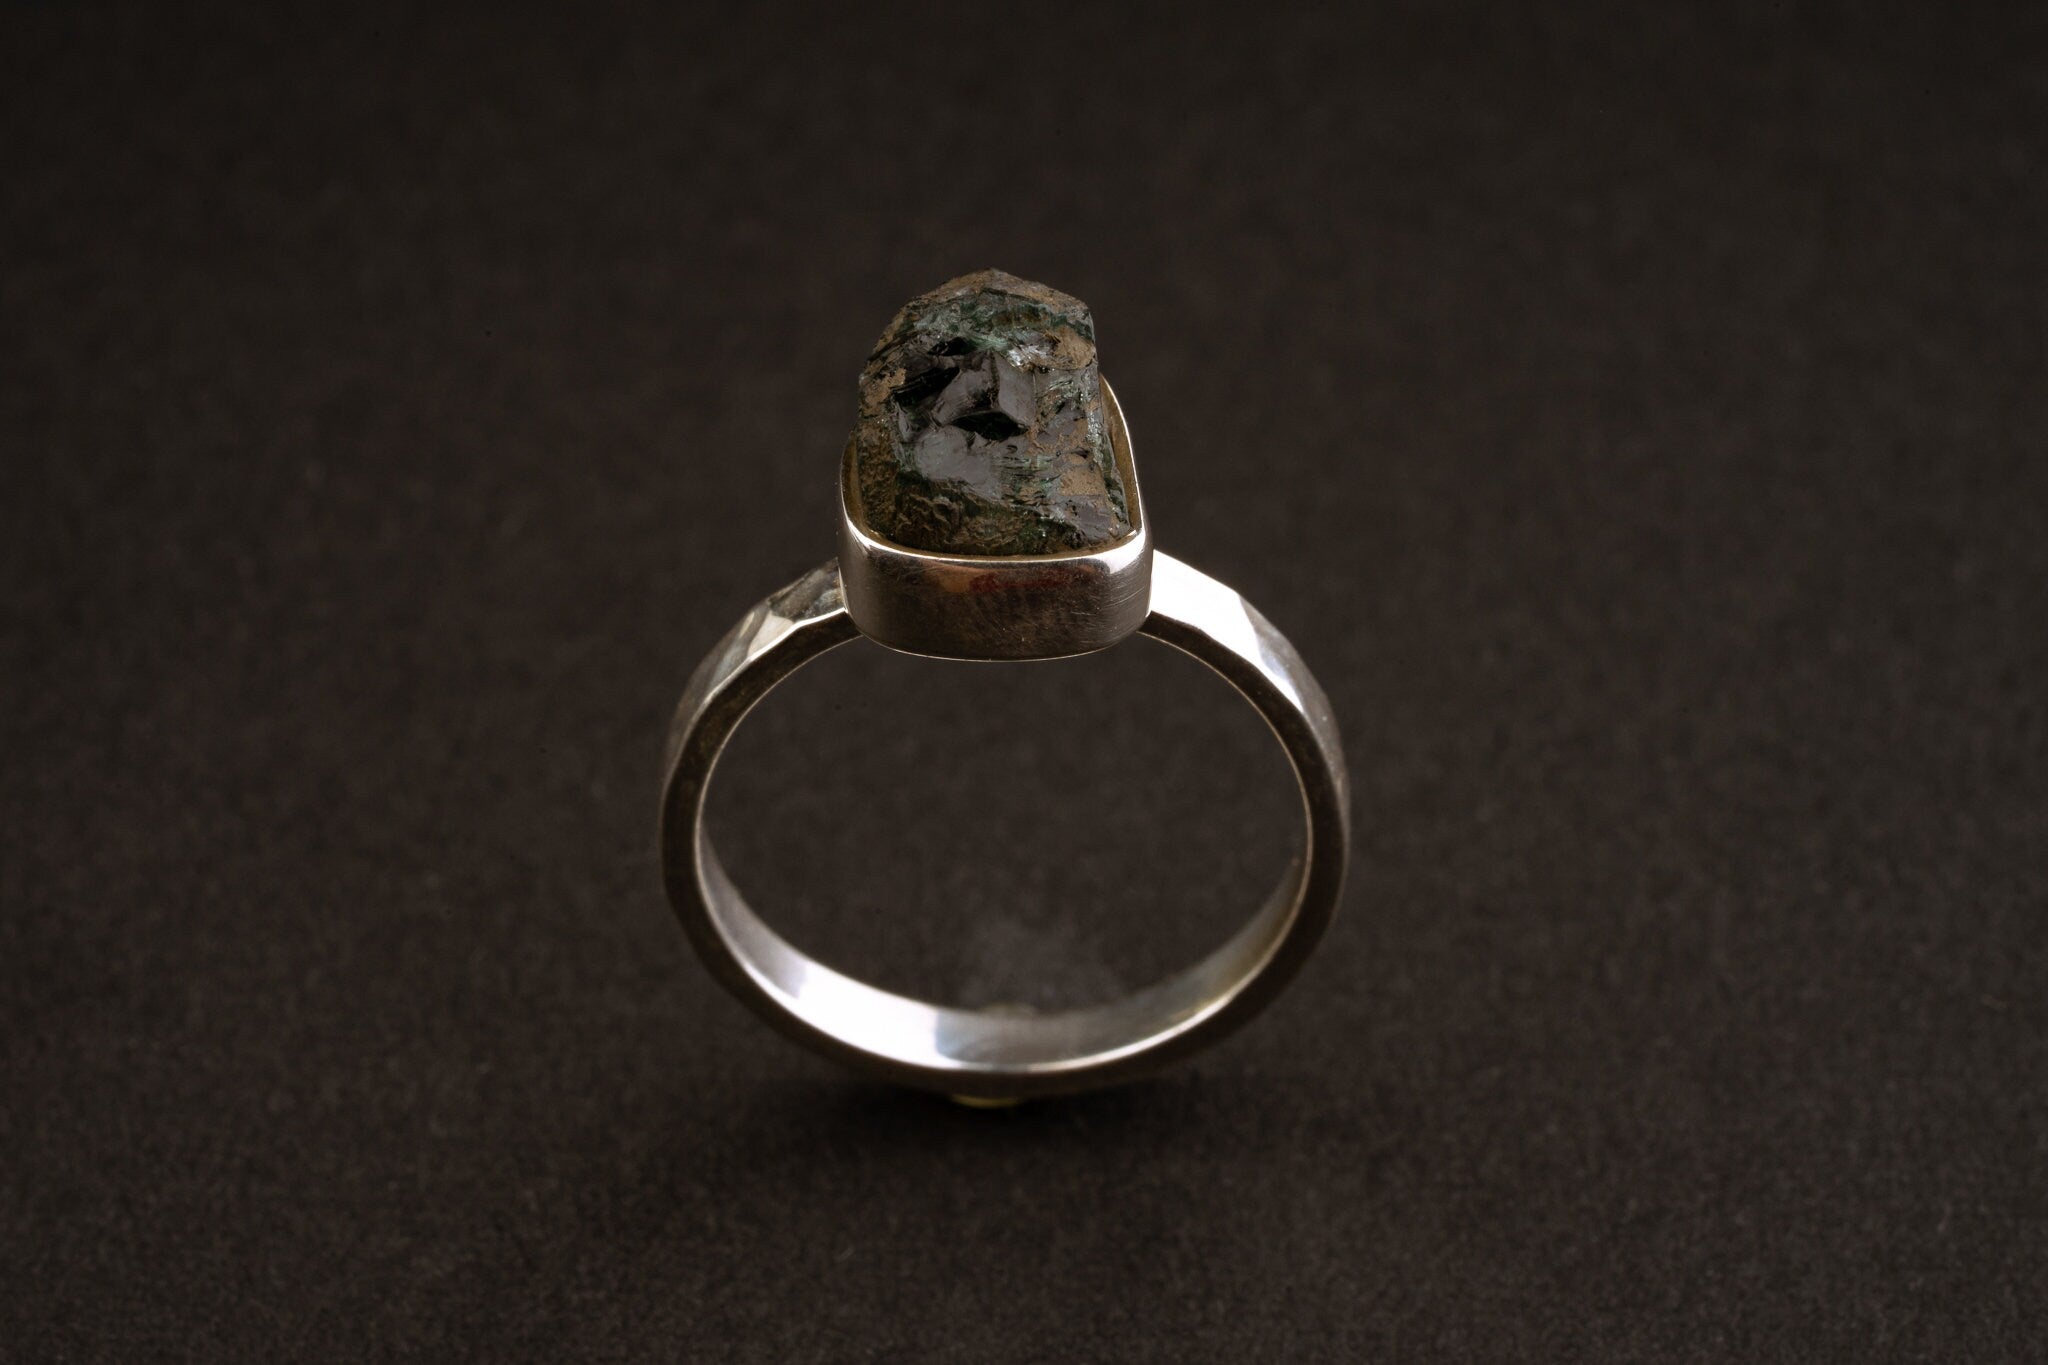 US 5 - Green gem Tourmaline - Solid 925 Sterling Silver Ring - Hammered Textured & Oxidized - Crystal Ring